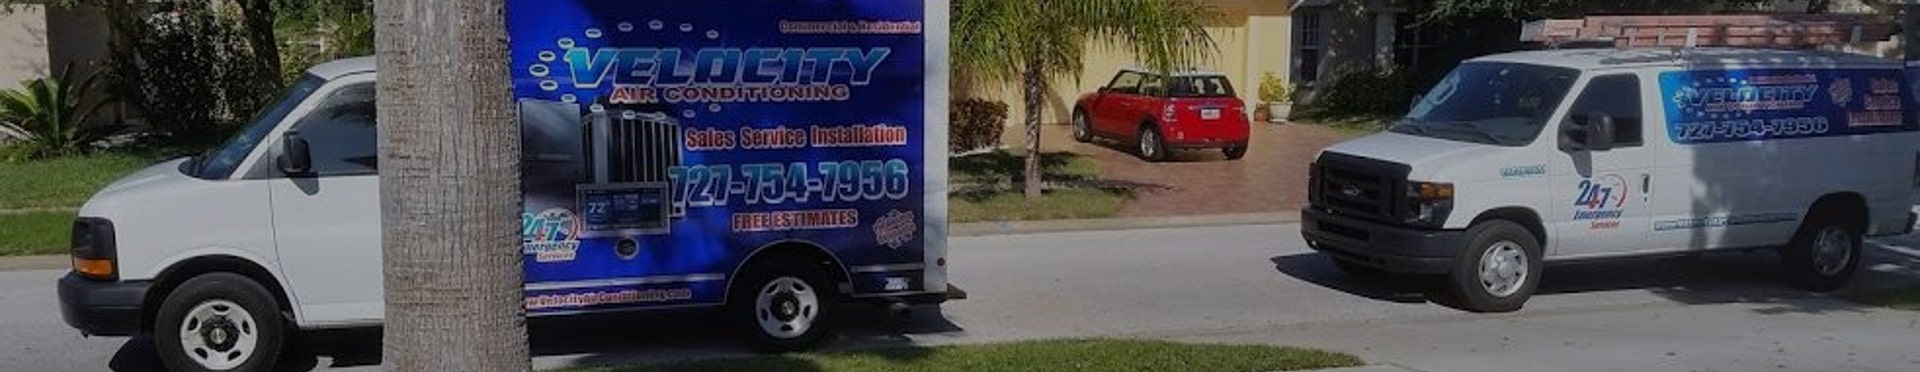 Clearwater Air Conditioning Repair